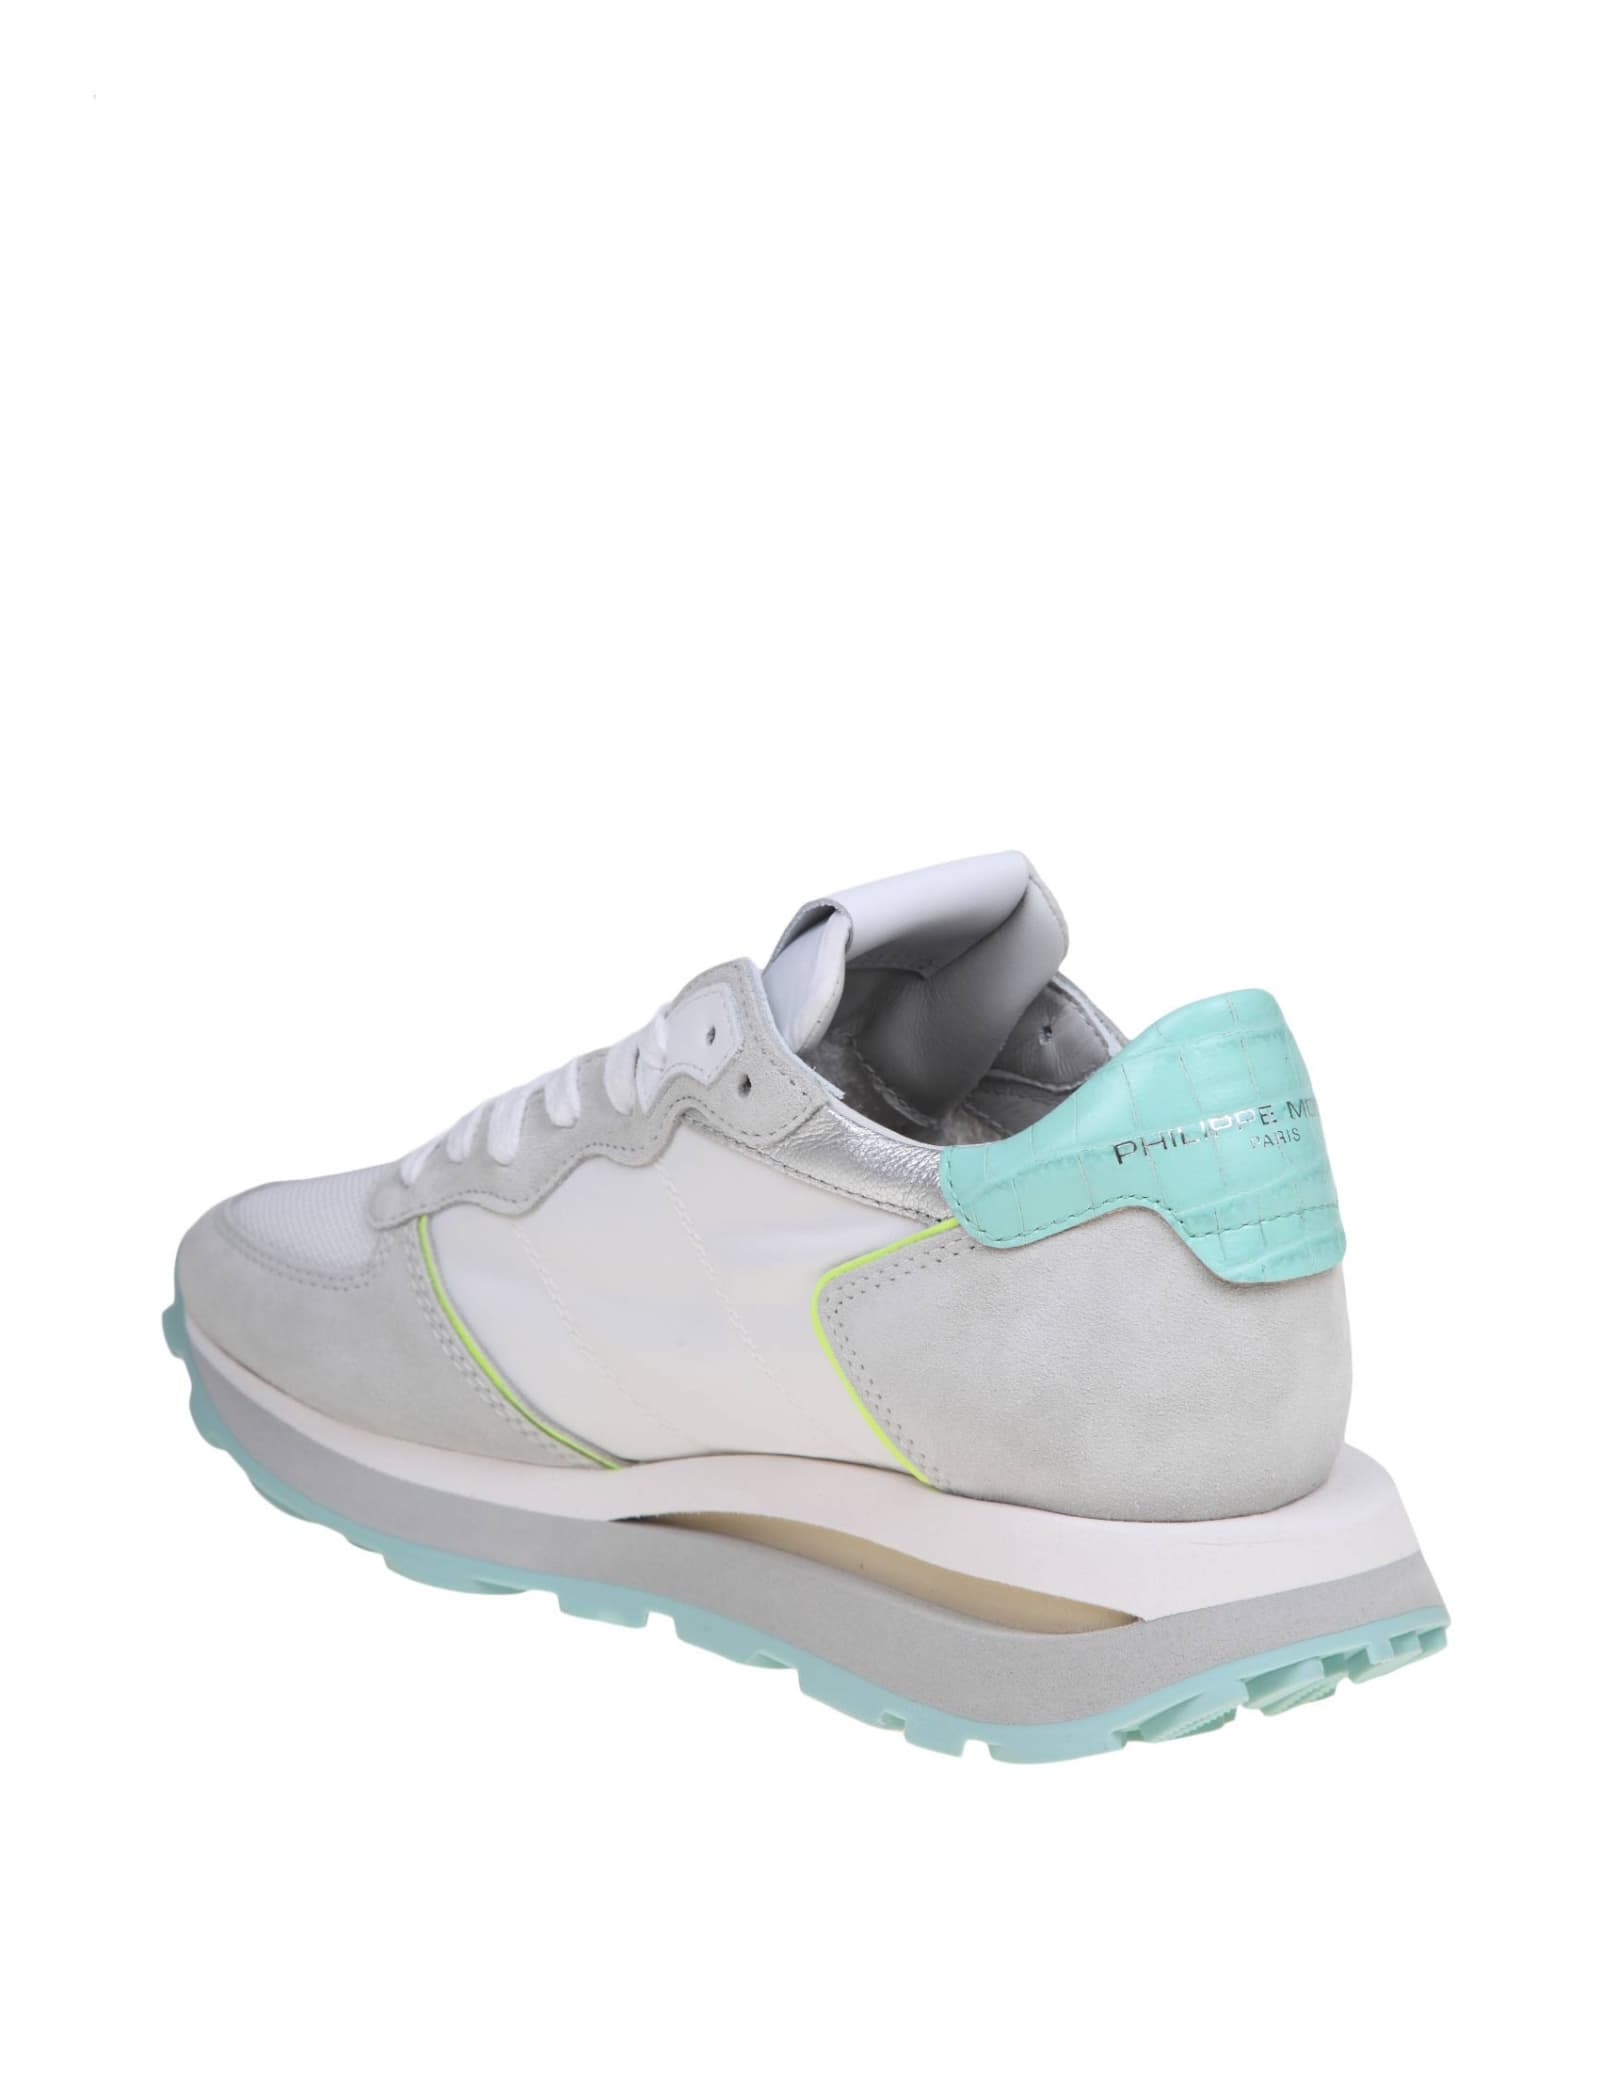 Shop Philipp Plein Philippe Model Tropez Sneakers In Suede And Nylon Color White And Turquoise